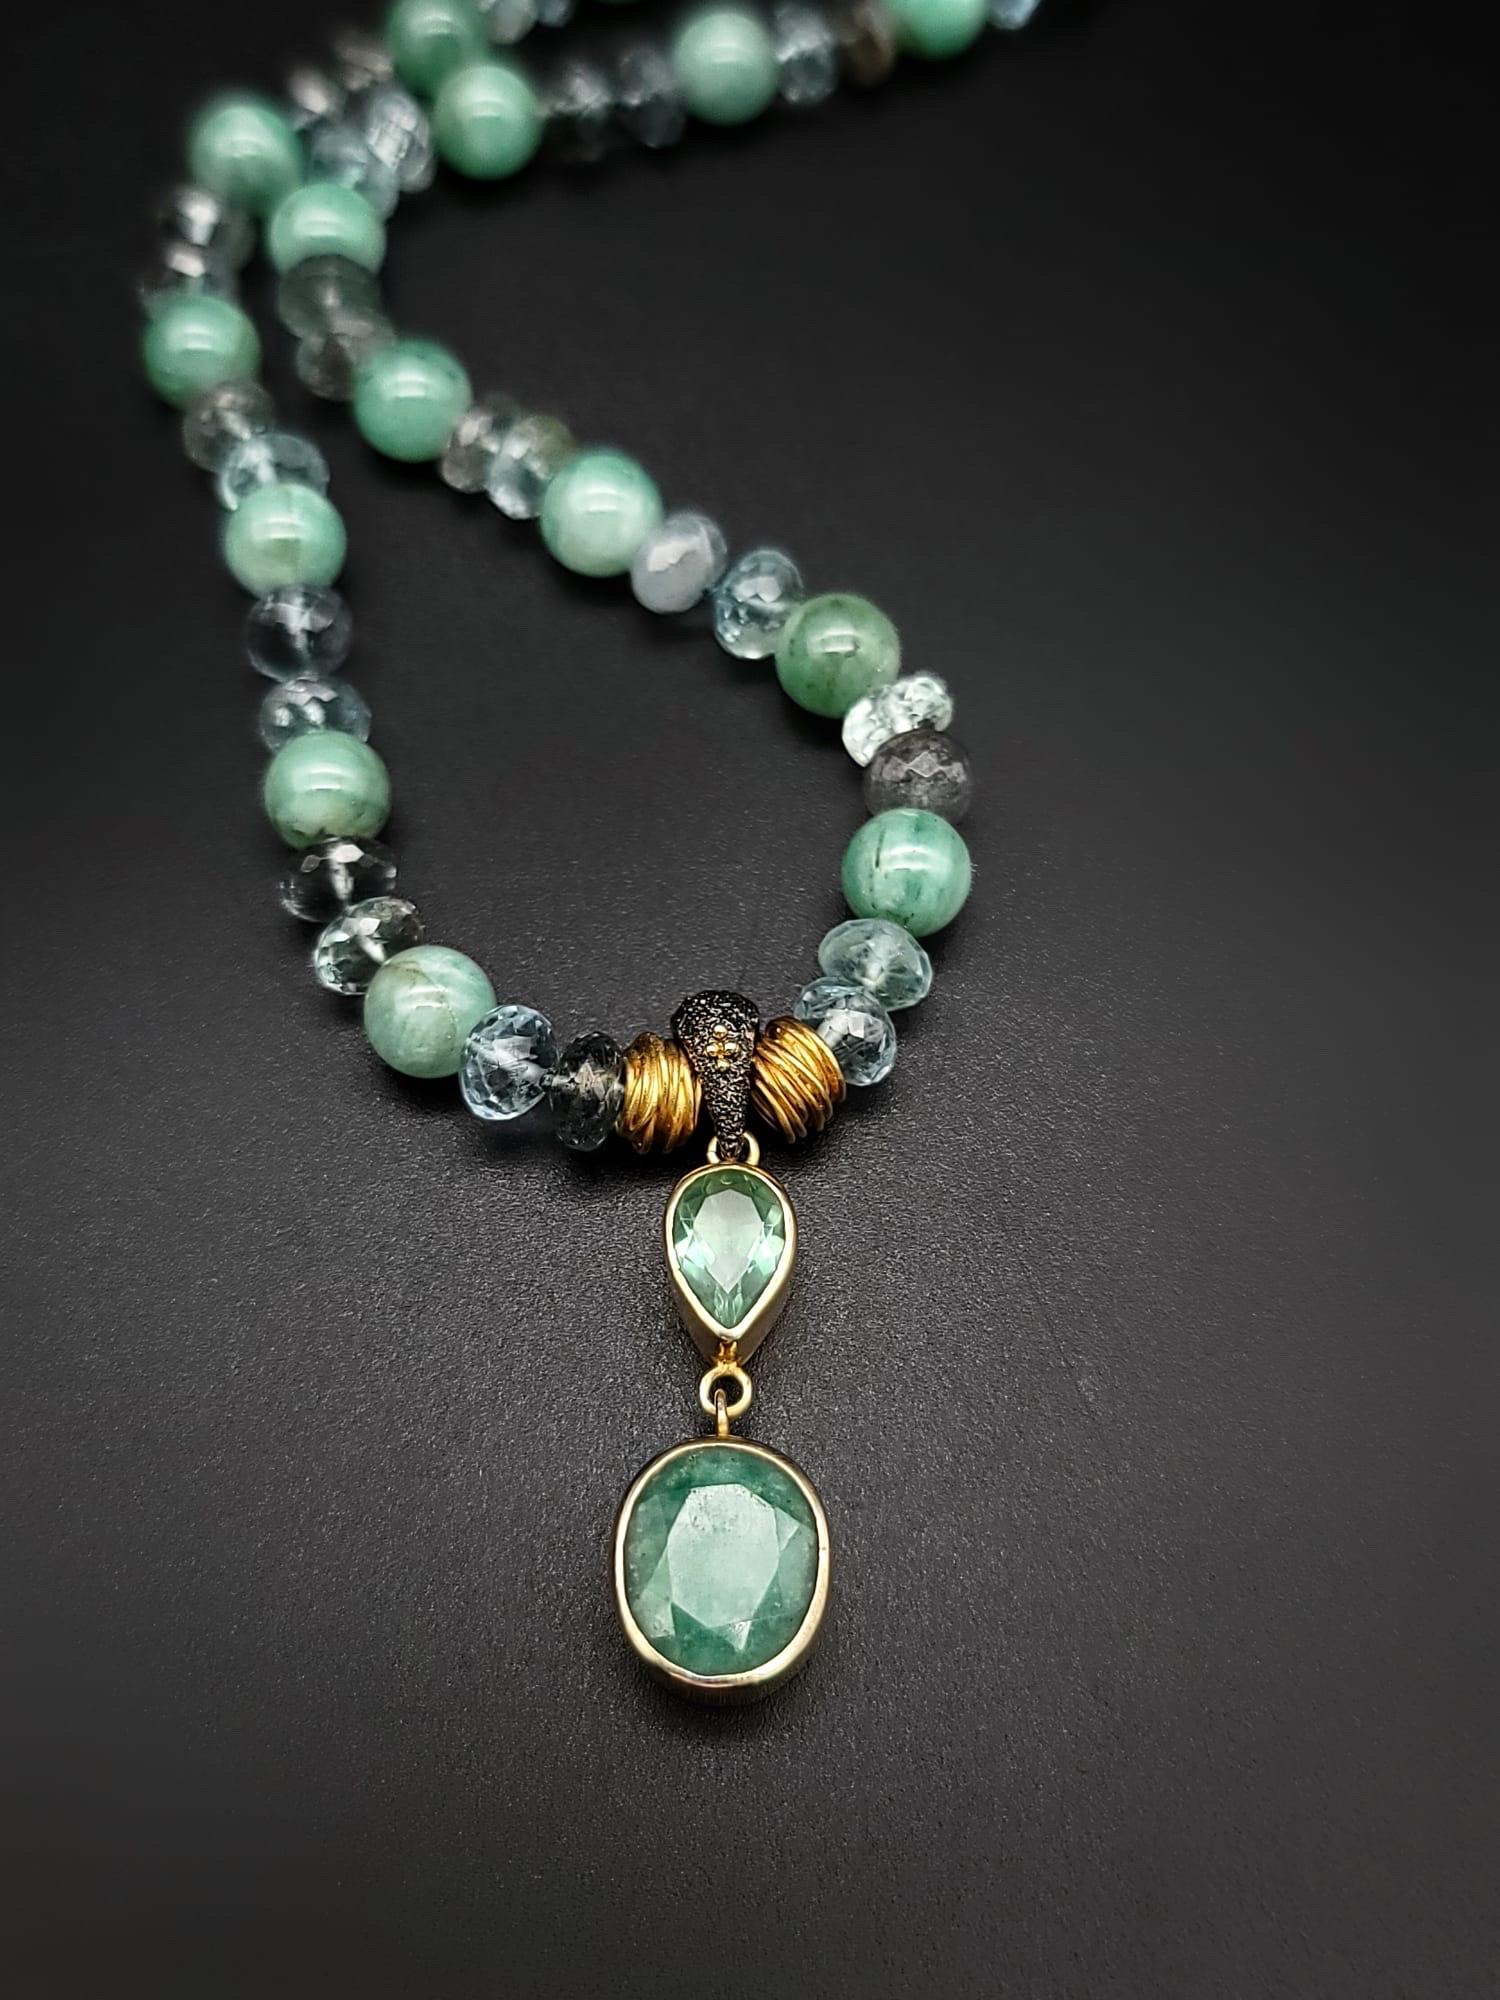 One-of-a-Kind


Blue and green on the color spectrum combined in a green Emerald and blue Aquamarine necklace. The Emeralds are 8m.m polished beads the Aquamarine are faceted roundels. The strand is anchored by Bora designed clasp of an Emerald